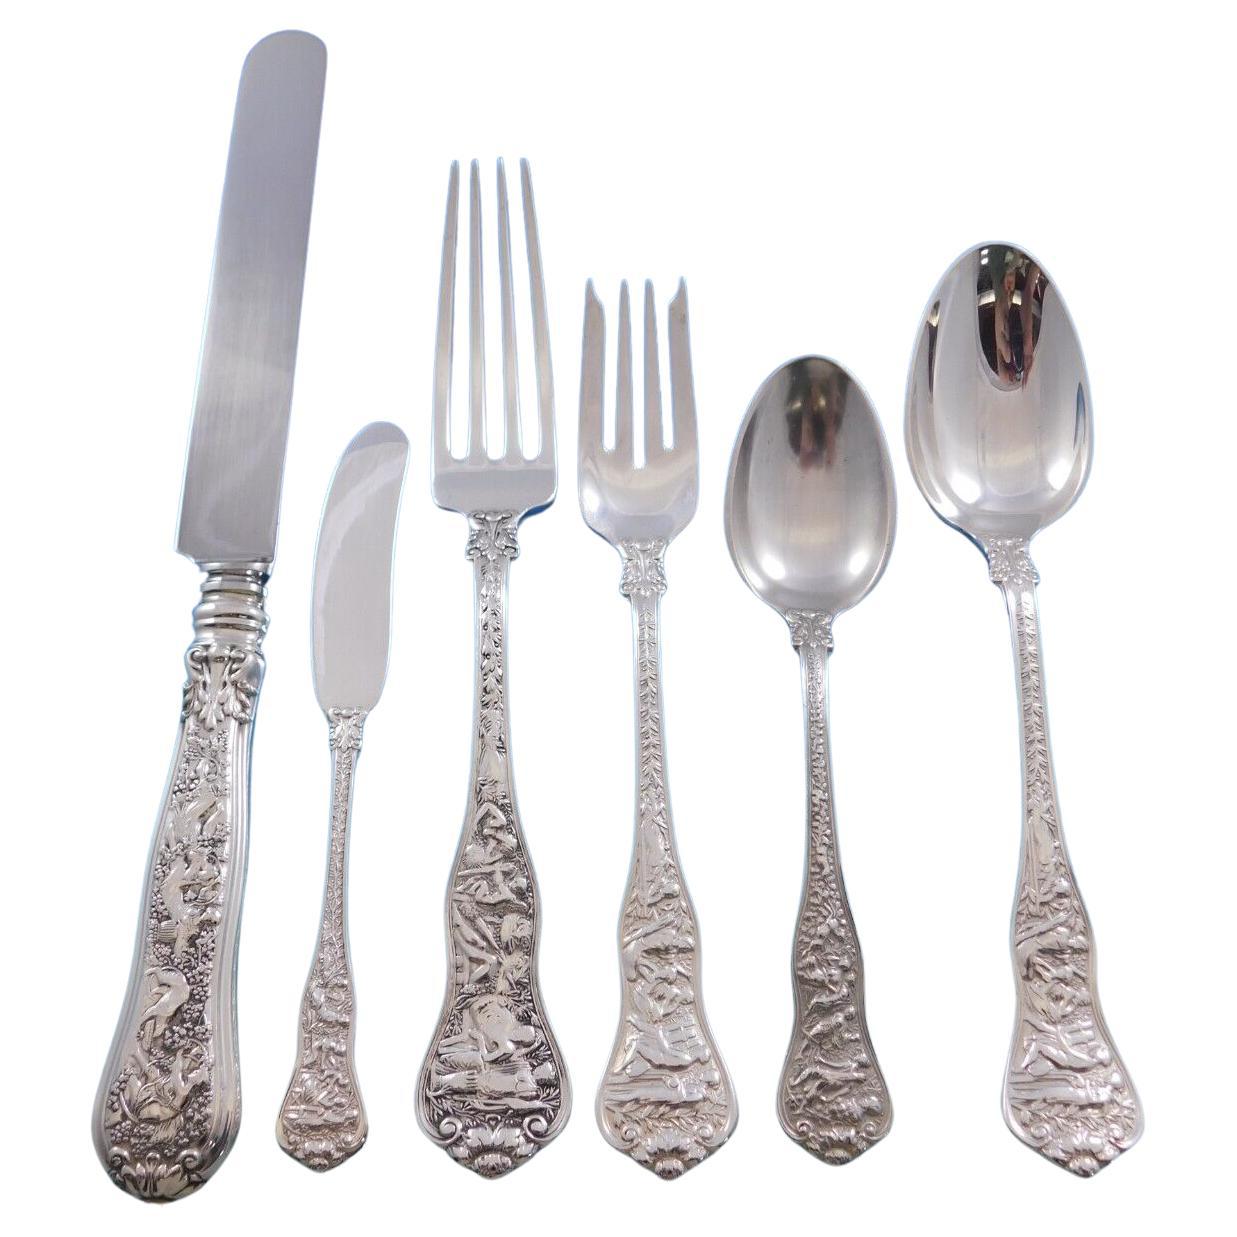 https://a.1stdibscdn.com/olympian-by-tiffany-co-sterling-silver-flatware-service-for-8-set-48-pc-dinner-for-sale/f_10224/f_313405421668611237429/f_31340542_1668611237728_bg_processed.jpg